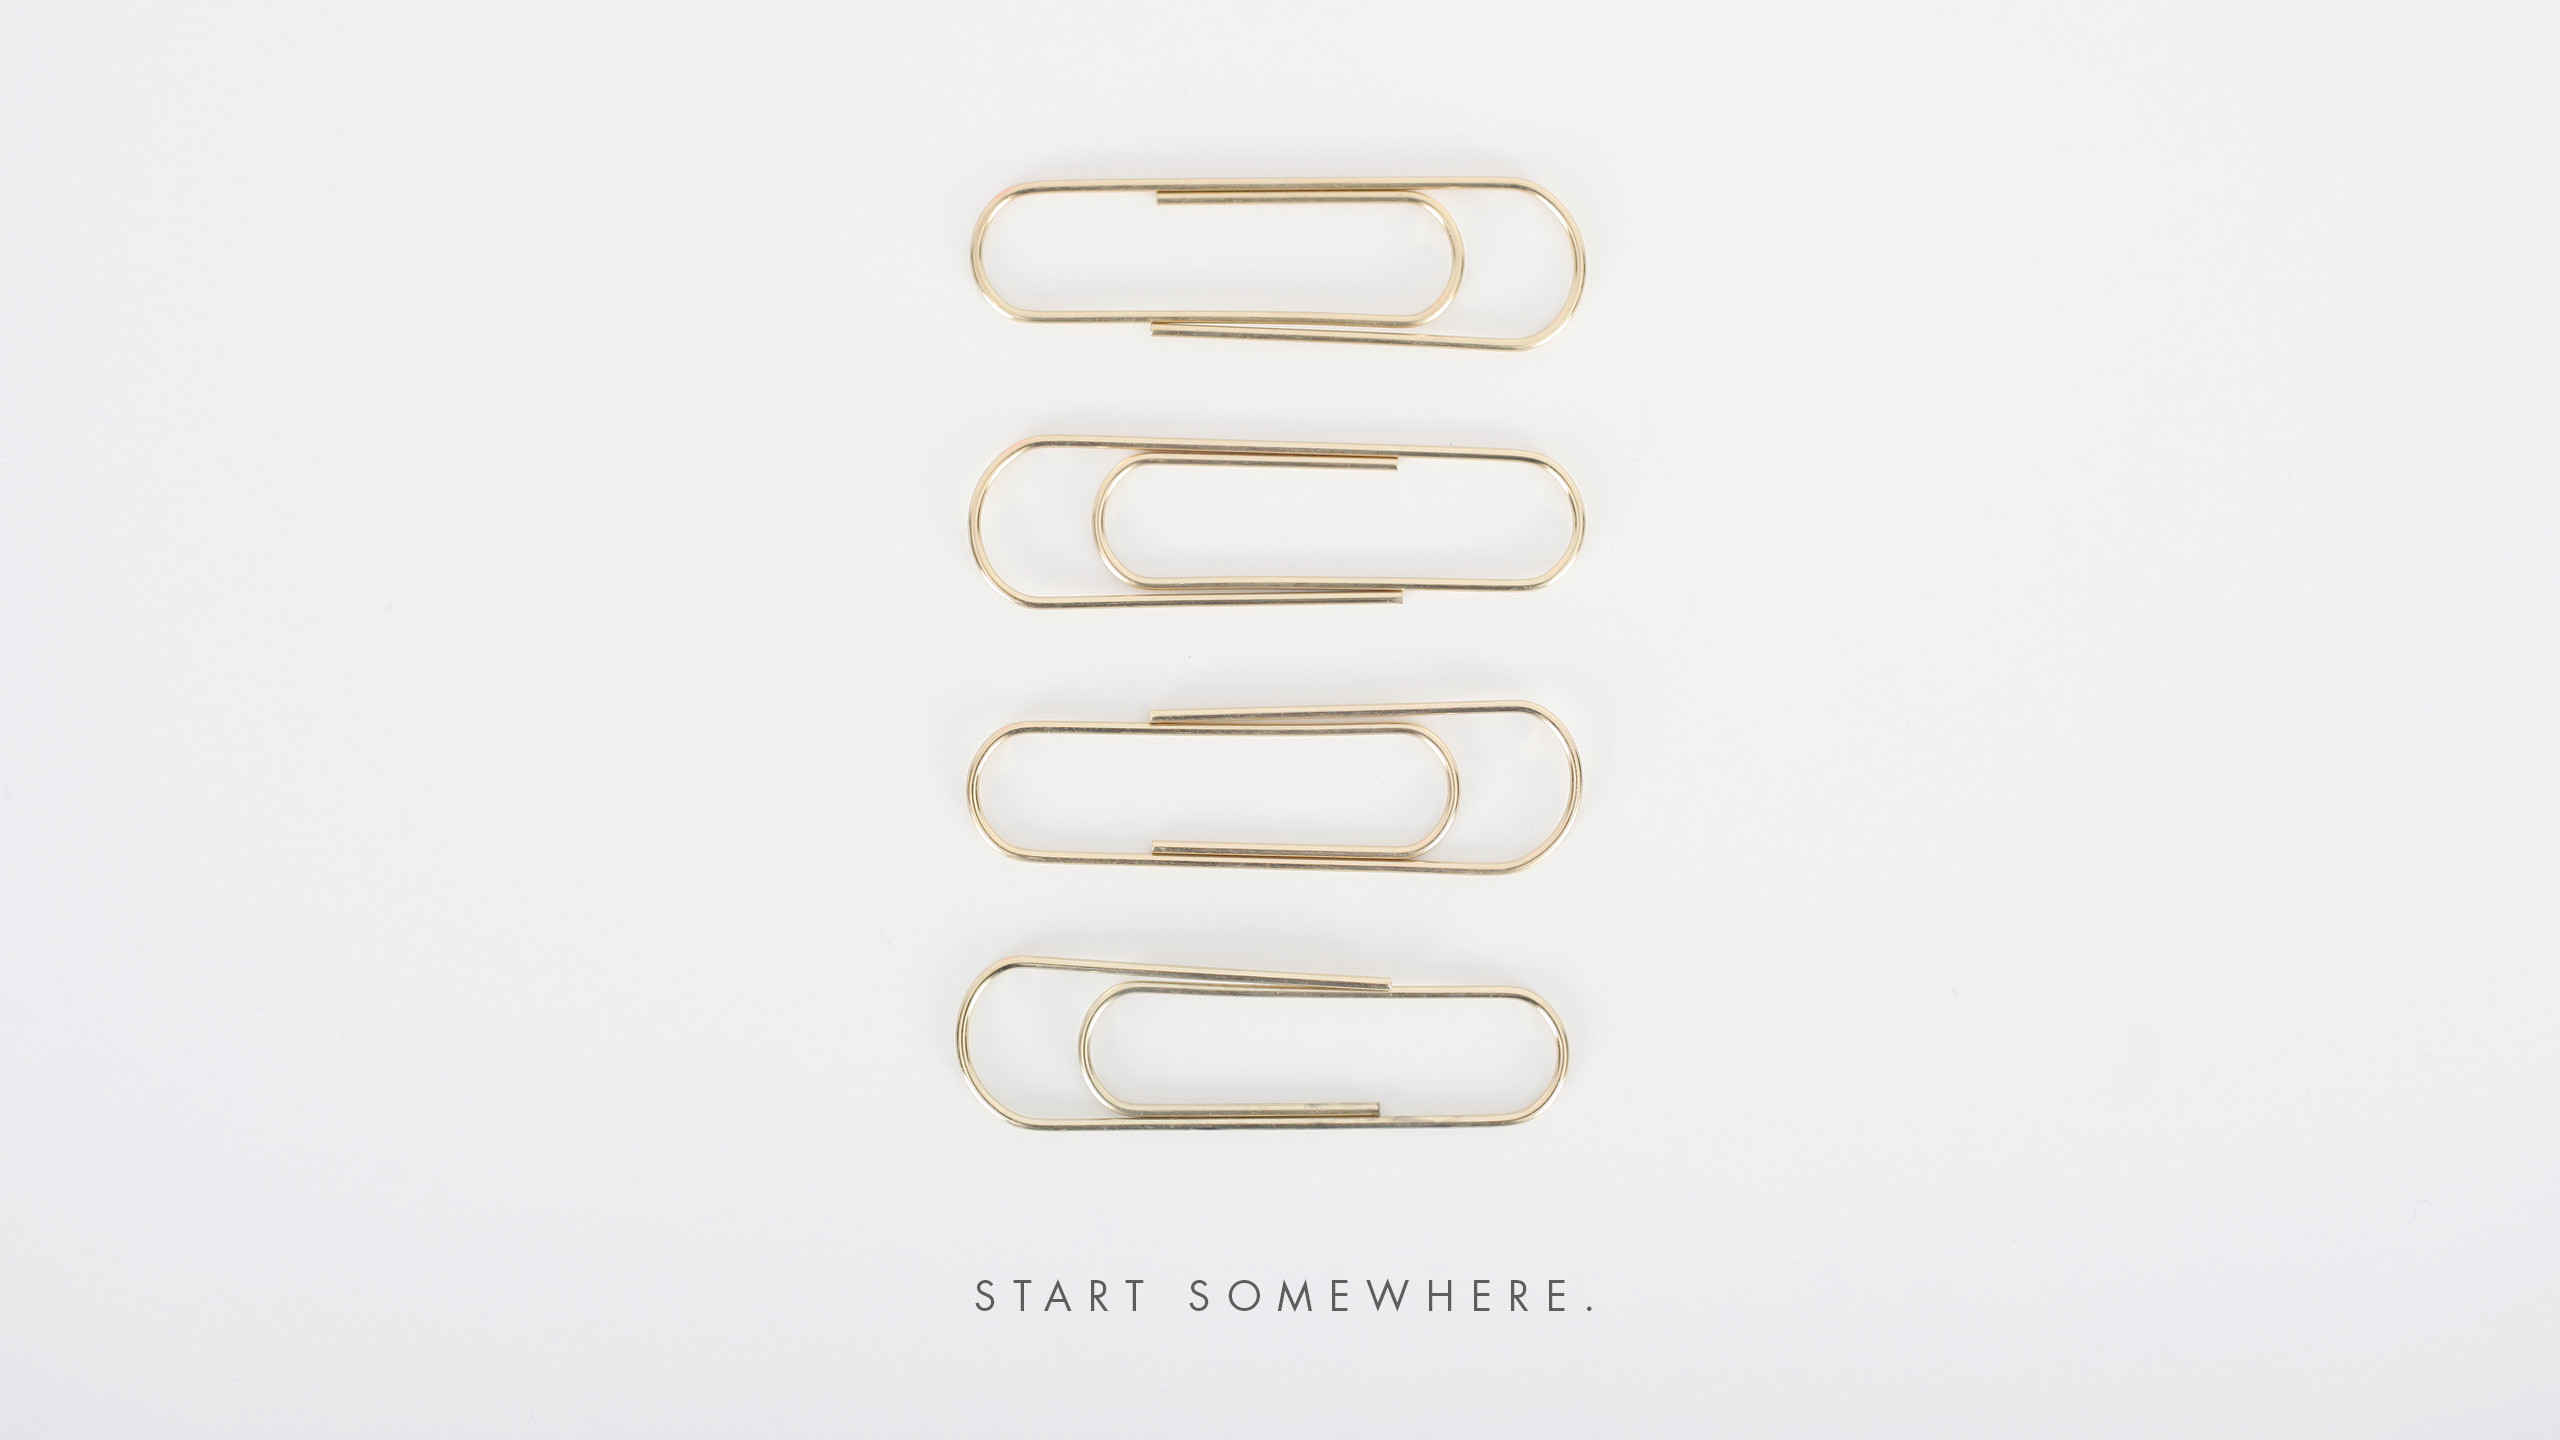 Paper clips start somewhere organize your life House Of Hipsters free desktop wallpaper 2560×1440 25601440 fonts printables Pinterest